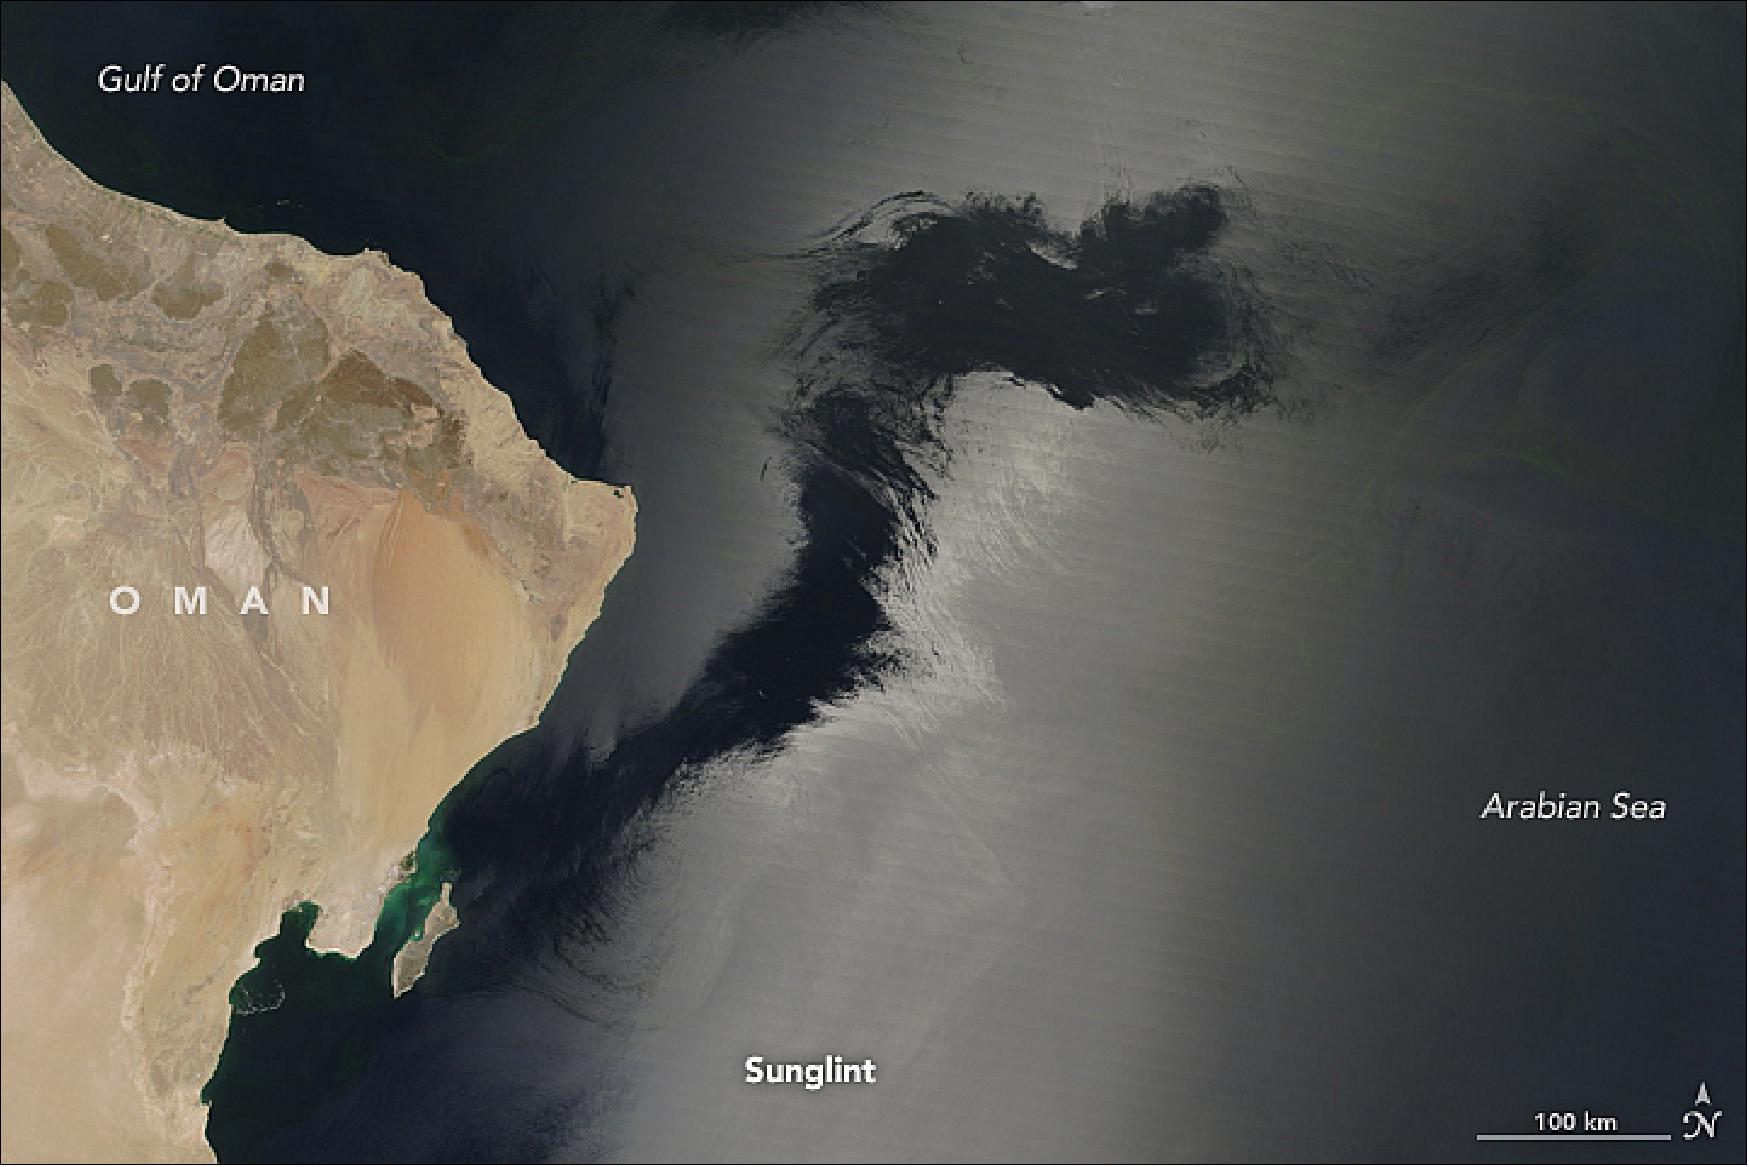 Figure 69: A large Sunglint region in the Arabian Sea interrupted by dark ares of wind-roughened surface waters. This image was acquired on April 11, 2017 with the MODIS instrument (image credit: NASA Earth Observatory, image by Jeff Schmaltz, text by Kathryn Hansen)